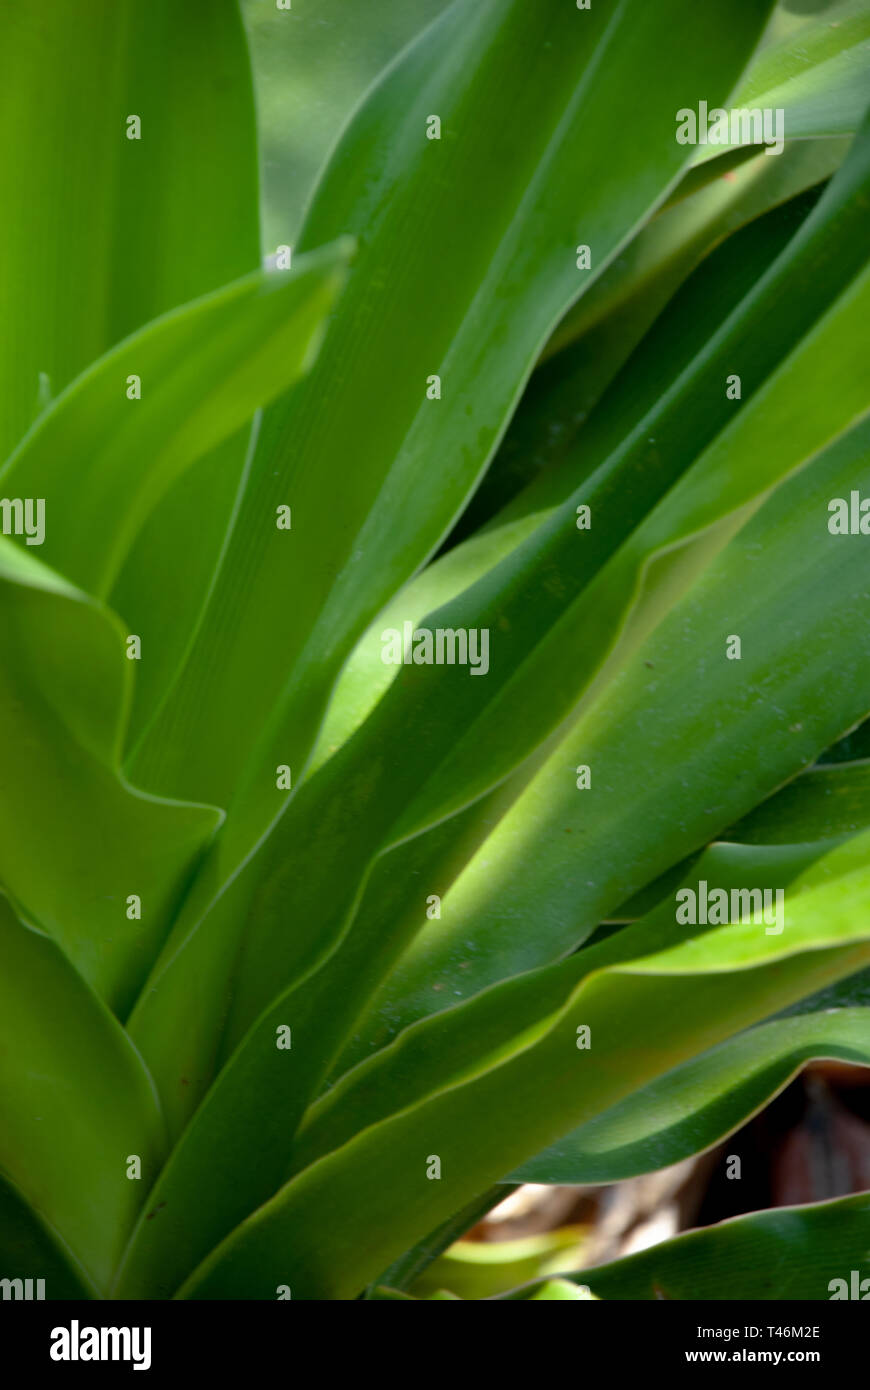 Plant with elongated green leaves Stock Photo